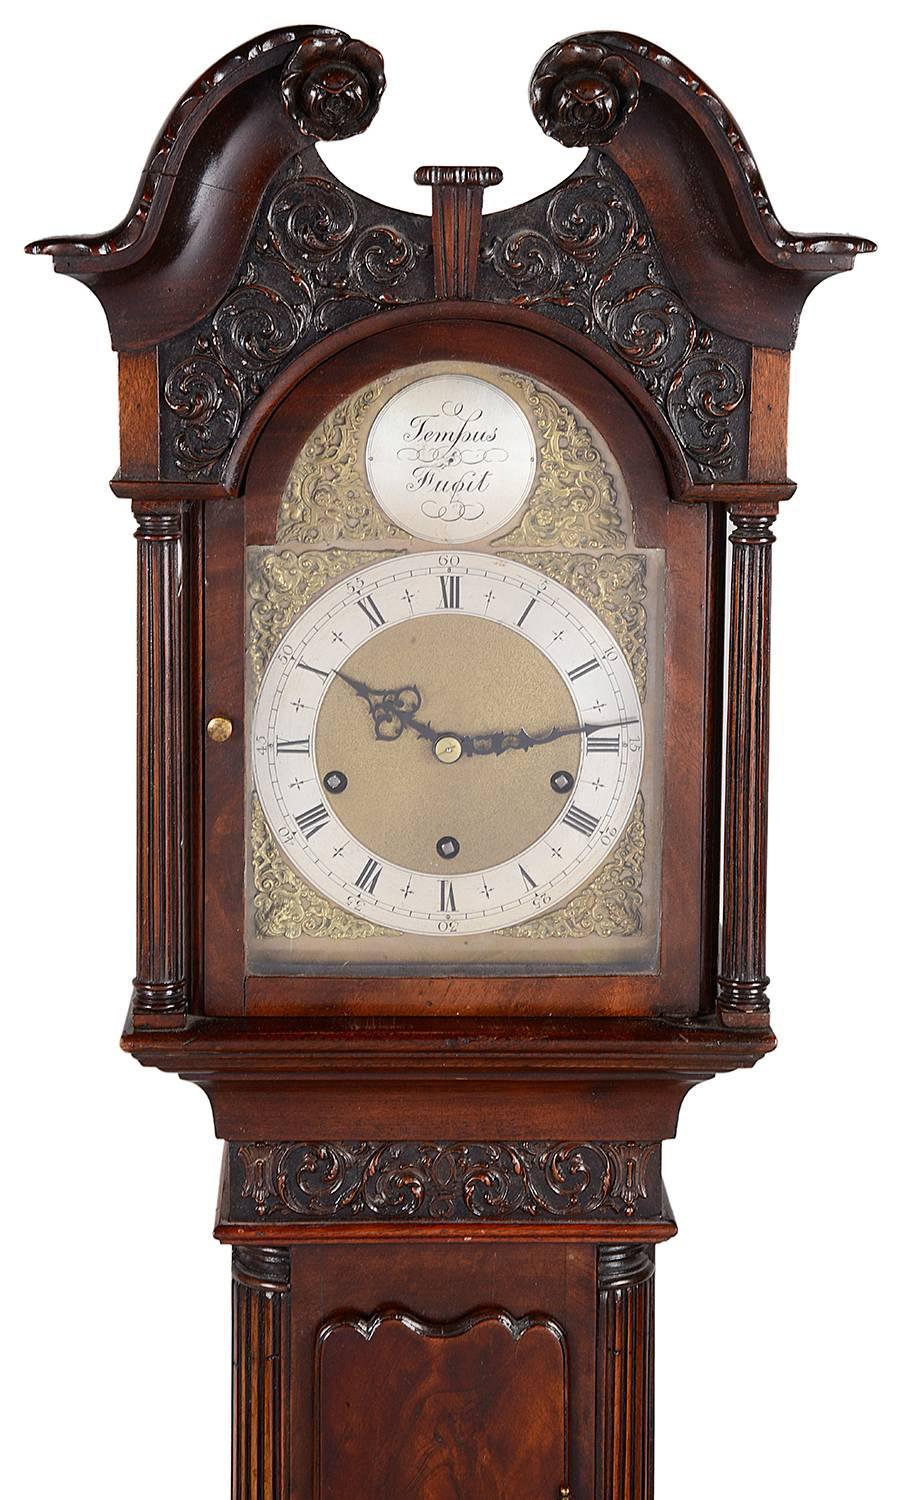 A very good quality Mahogany Chippendale style Grandmother clock, having a three train chiming movement, a figured Mahogany case with carved fretwork and molded panels.